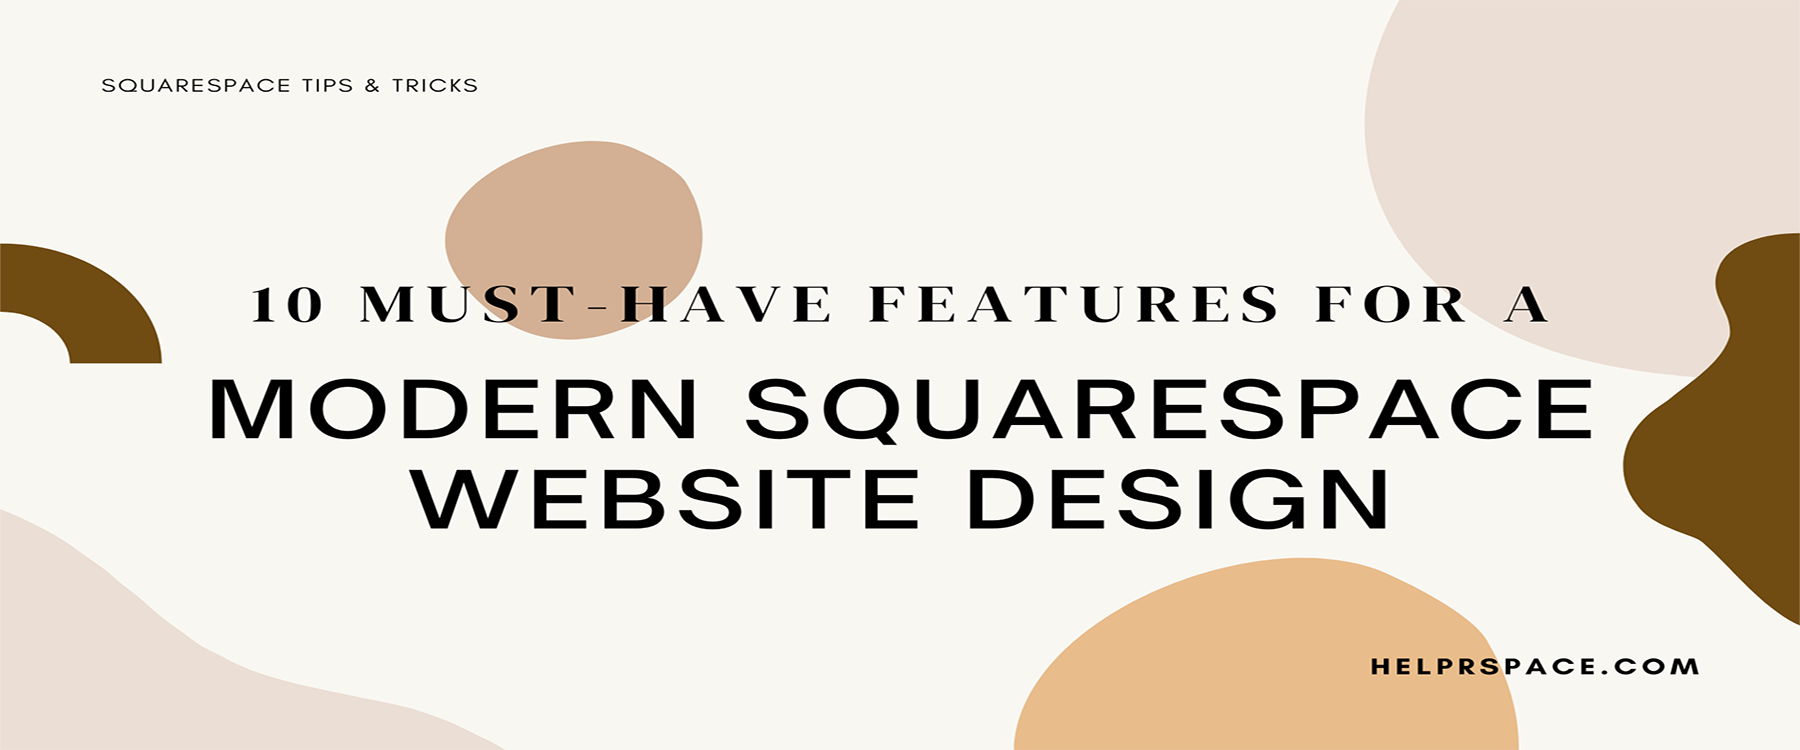 10 Must-Have Features for a Modern Squarespace Website Design